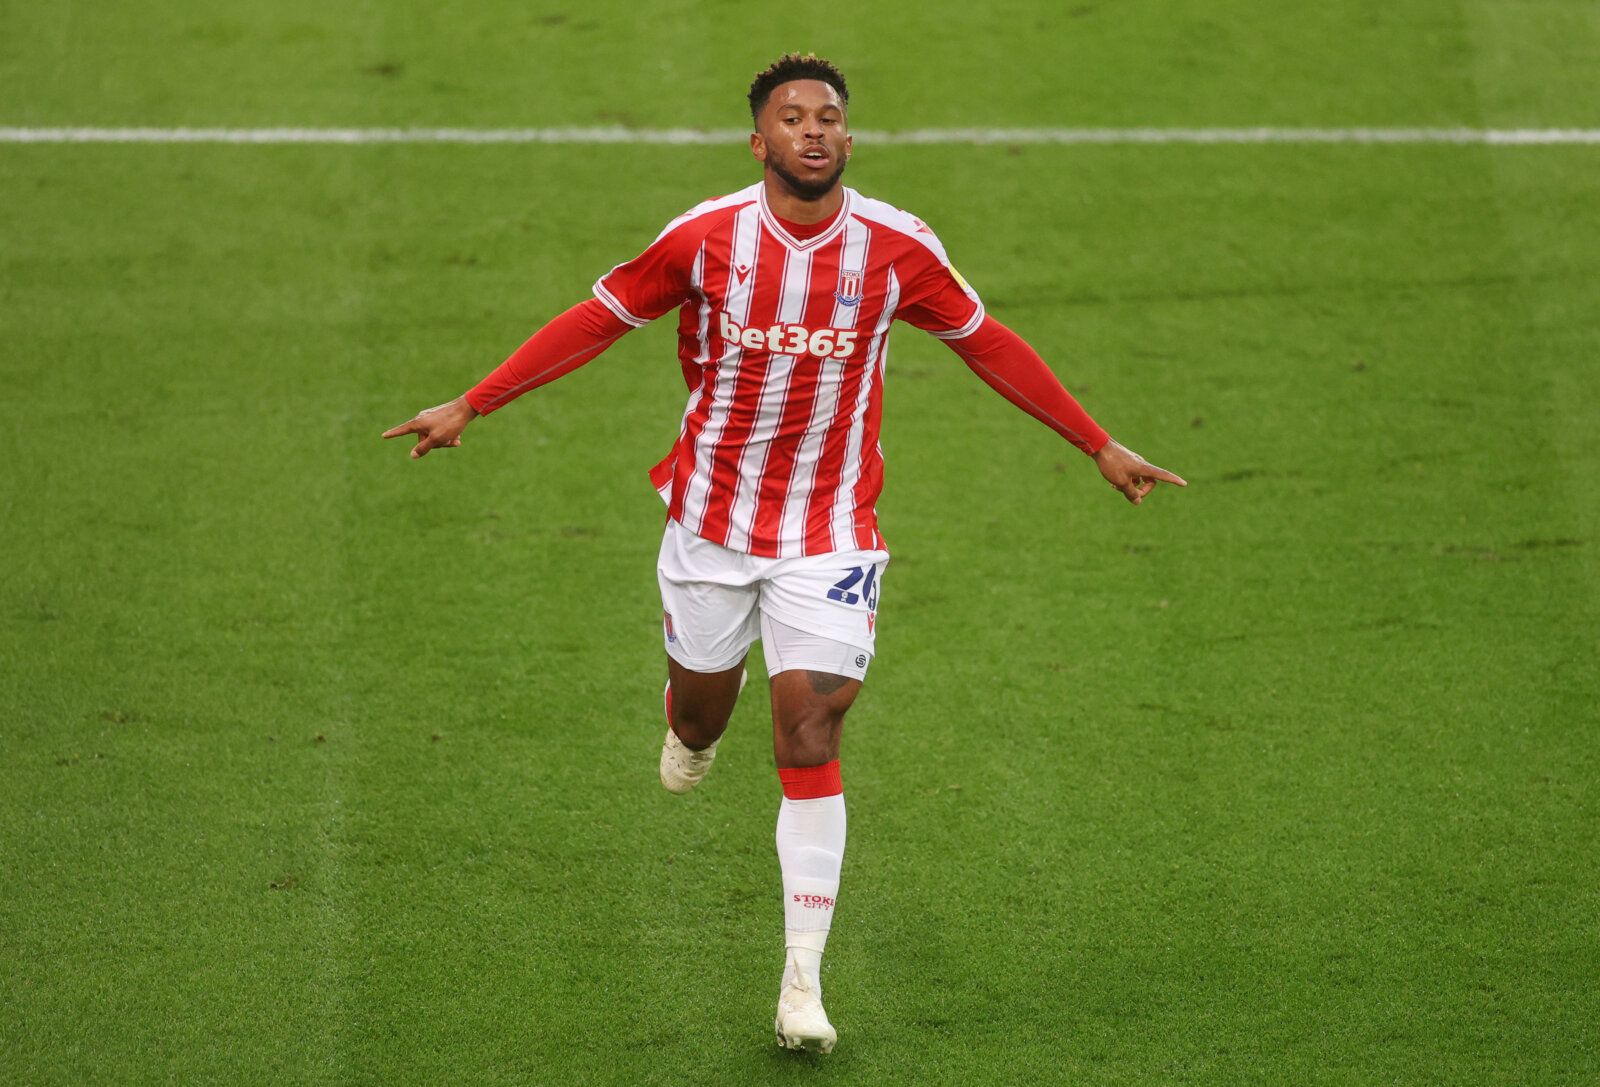 Soccer Football - Championship - Stoke City v Huddersfield Town - bet365 Stadium, Stoke-on-Trent, Britain - November 21, 2020 Stoke City's Tyrese Campbell celebrates scoring their second goal Action Images/Carl Recine EDITORIAL USE ONLY. No use with unauthorized audio, video, data, fixture lists, club/league logos or 'live' services. Online in-match use limited to 75 images, no video emulation. No use in betting, games or single club /league/player publications.  Please contact your account repr